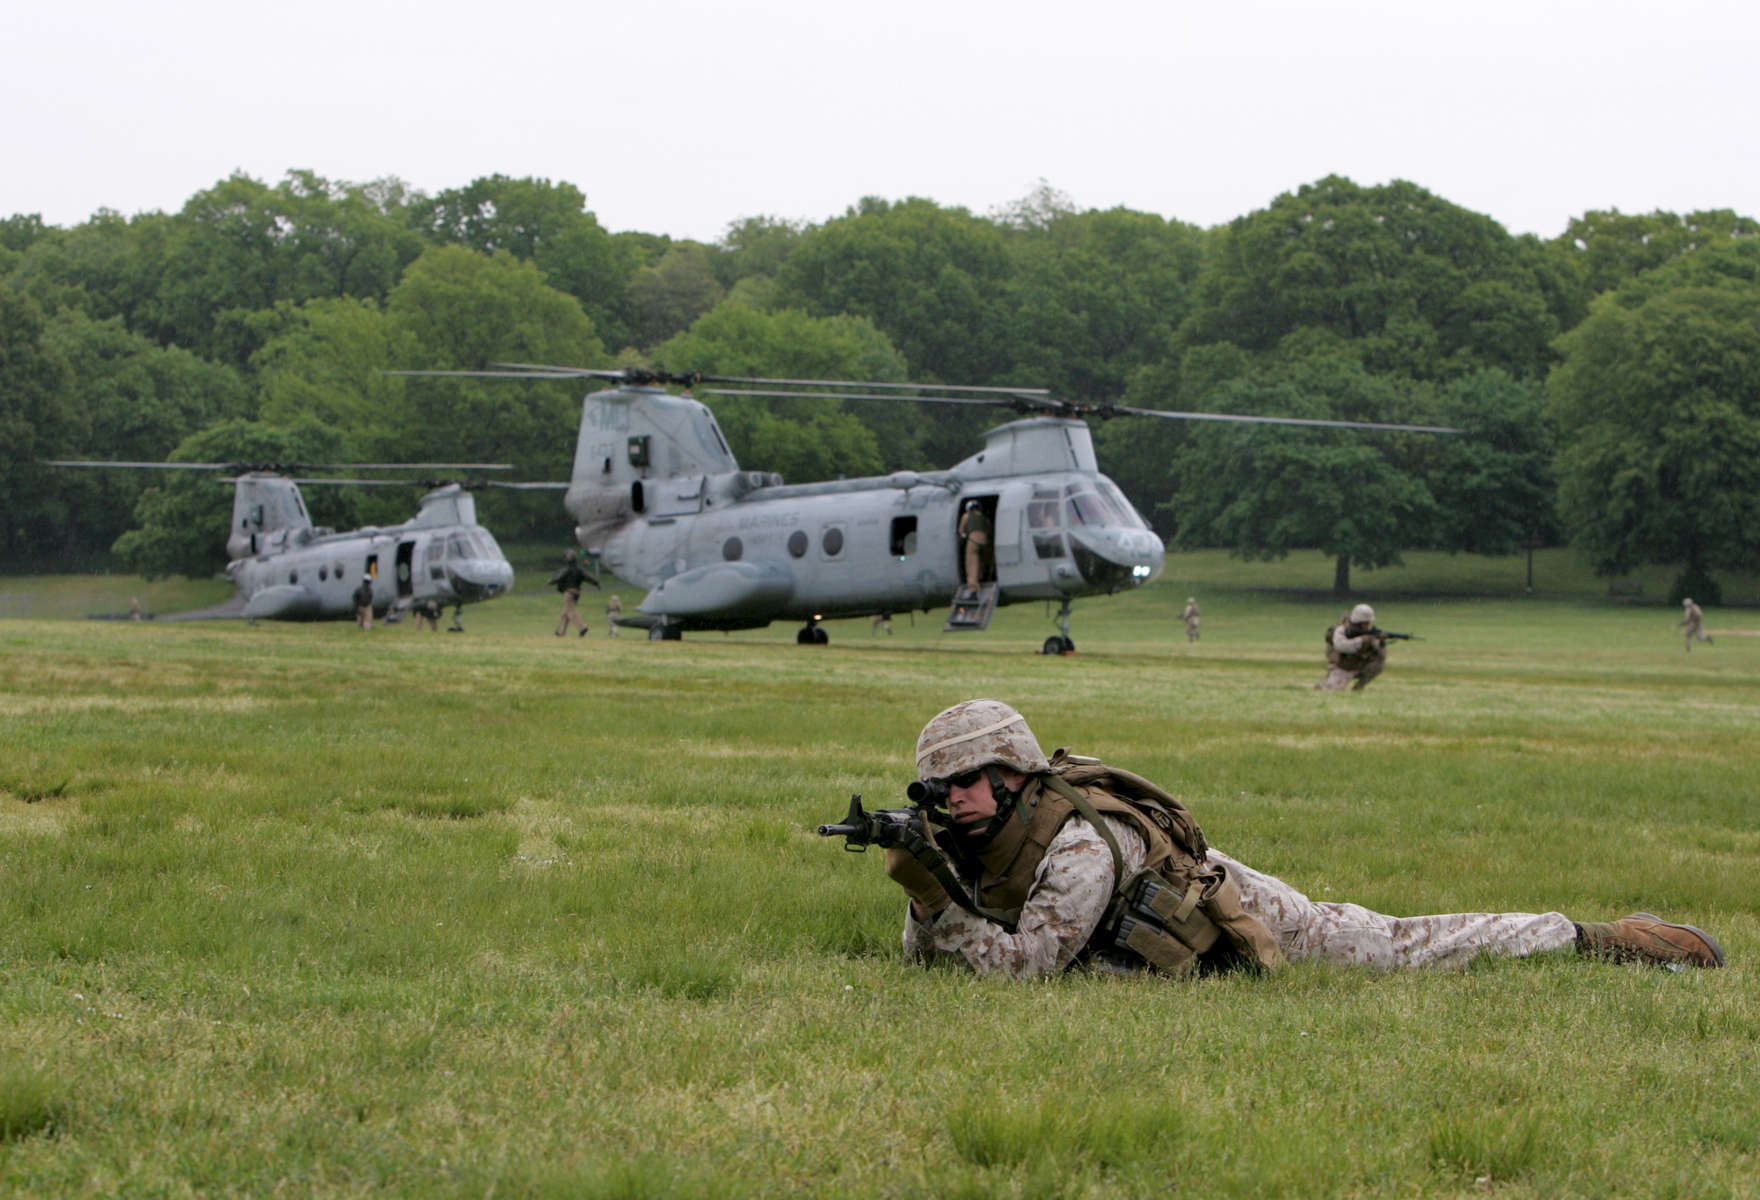 United States Marine Corp perform a raid demonstration at Cunningham Park located at Union Turnpike and Francis Lewis Blvd. in Queens on May 22, 2008. The US Marine Corp Demonstration is part of the Fleet Week events and activities.